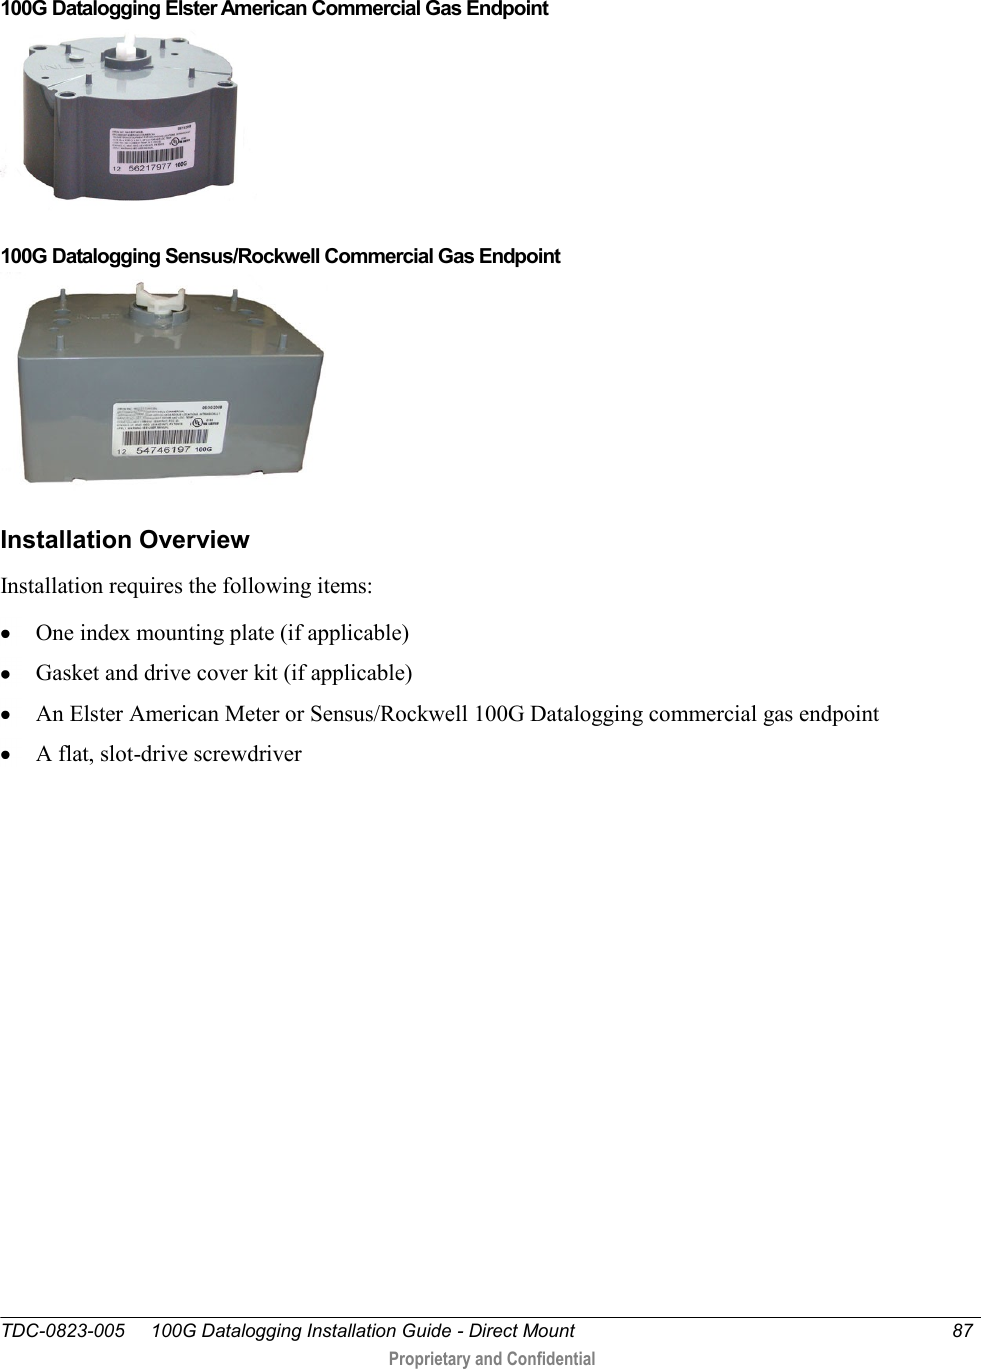  TDC-0823-005     100G Datalogging Installation Guide - Direct Mount  87   Proprietary and Confidential      100G Datalogging Elster American Commercial Gas Endpoint   100G Datalogging Sensus/Rockwell Commercial Gas Endpoint  Installation Overview Installation requires the following items:  One index mounting plate (if applicable)  Gasket and drive cover kit (if applicable)  An Elster American Meter or Sensus/Rockwell 100G Datalogging commercial gas endpoint   A flat, slot-drive screwdriver  